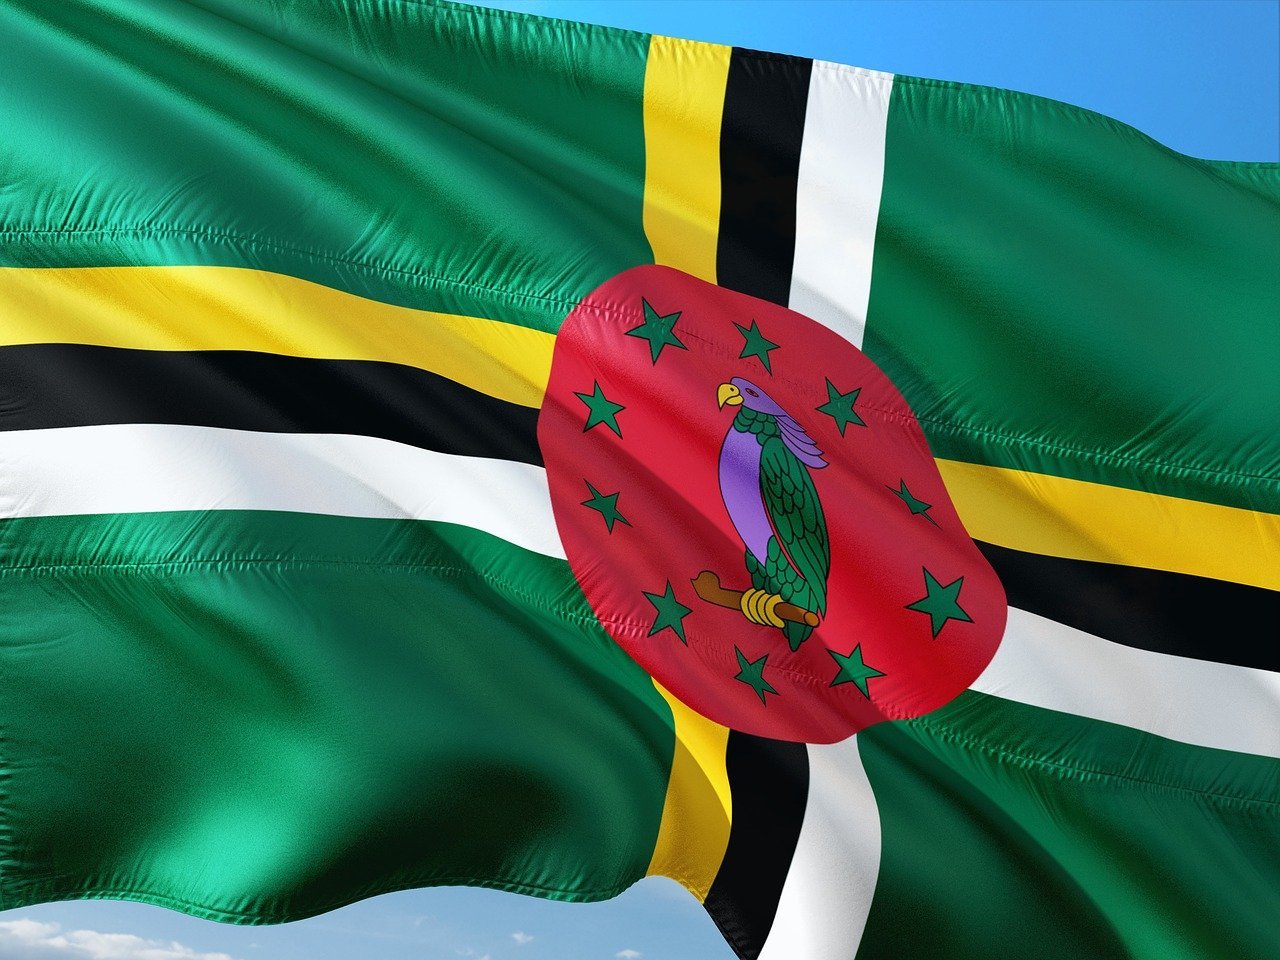 Dominica’s passport could be an easy win